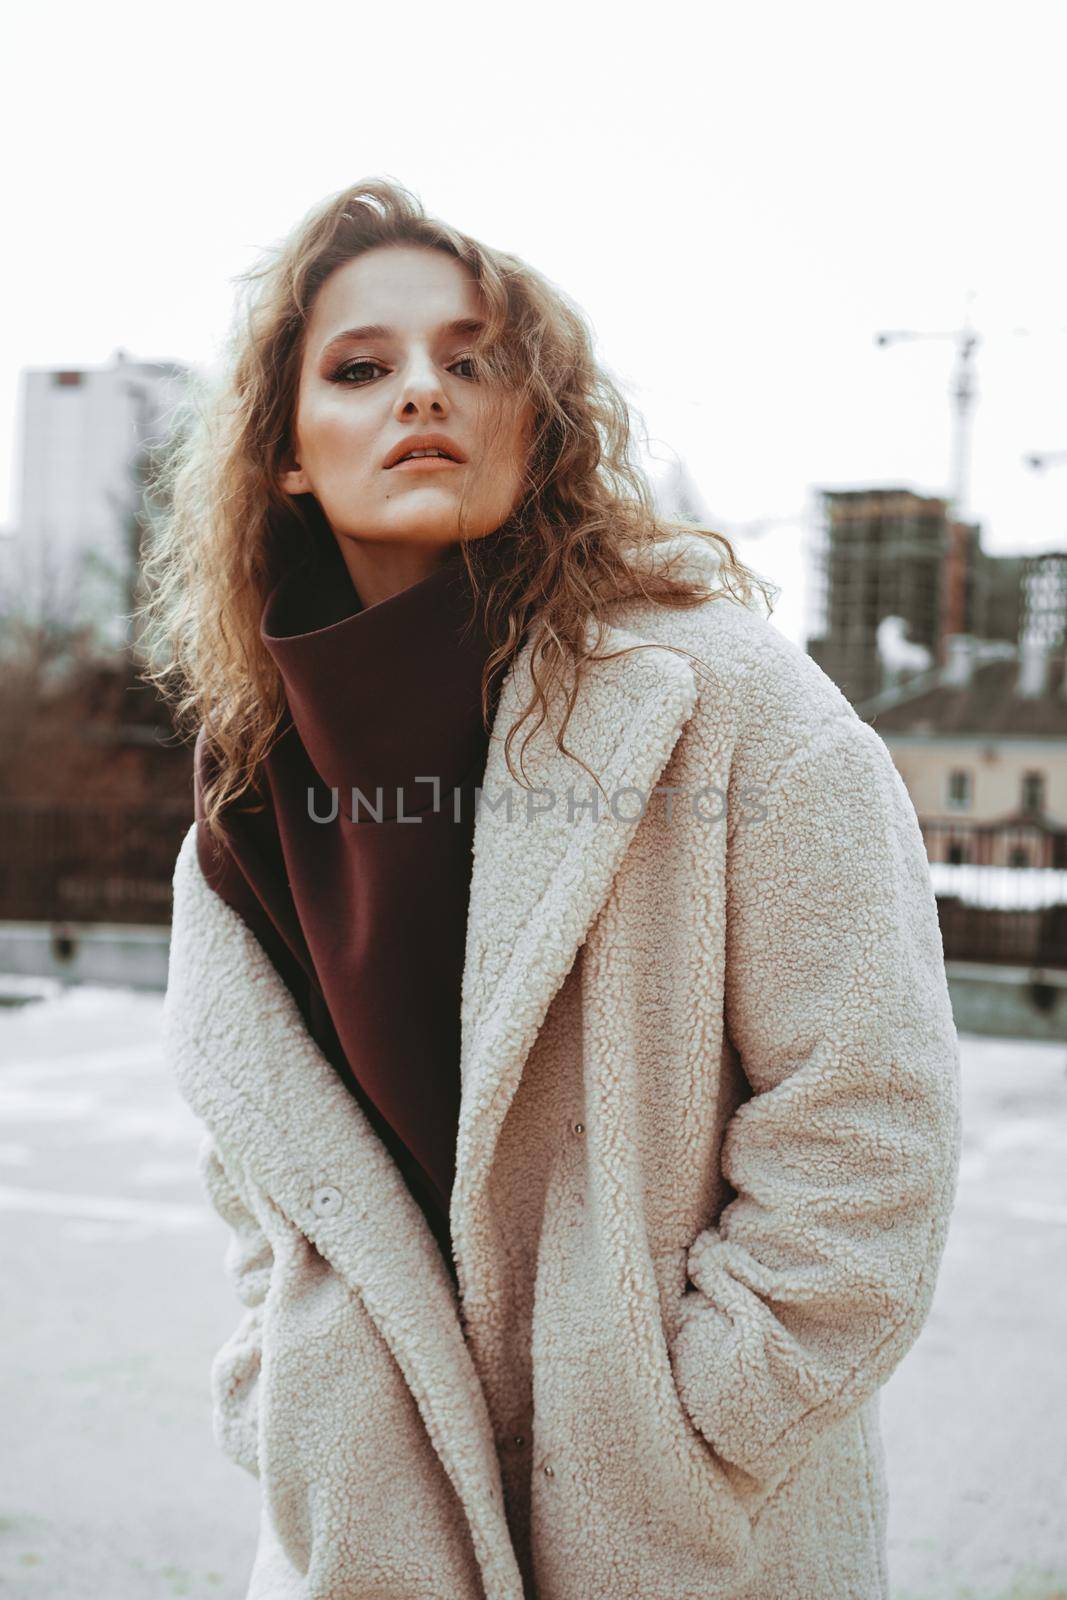 A girl with red curly hair in a white coat poses on outdoor parking in cold autumn. City Style - Urban. vertical photo